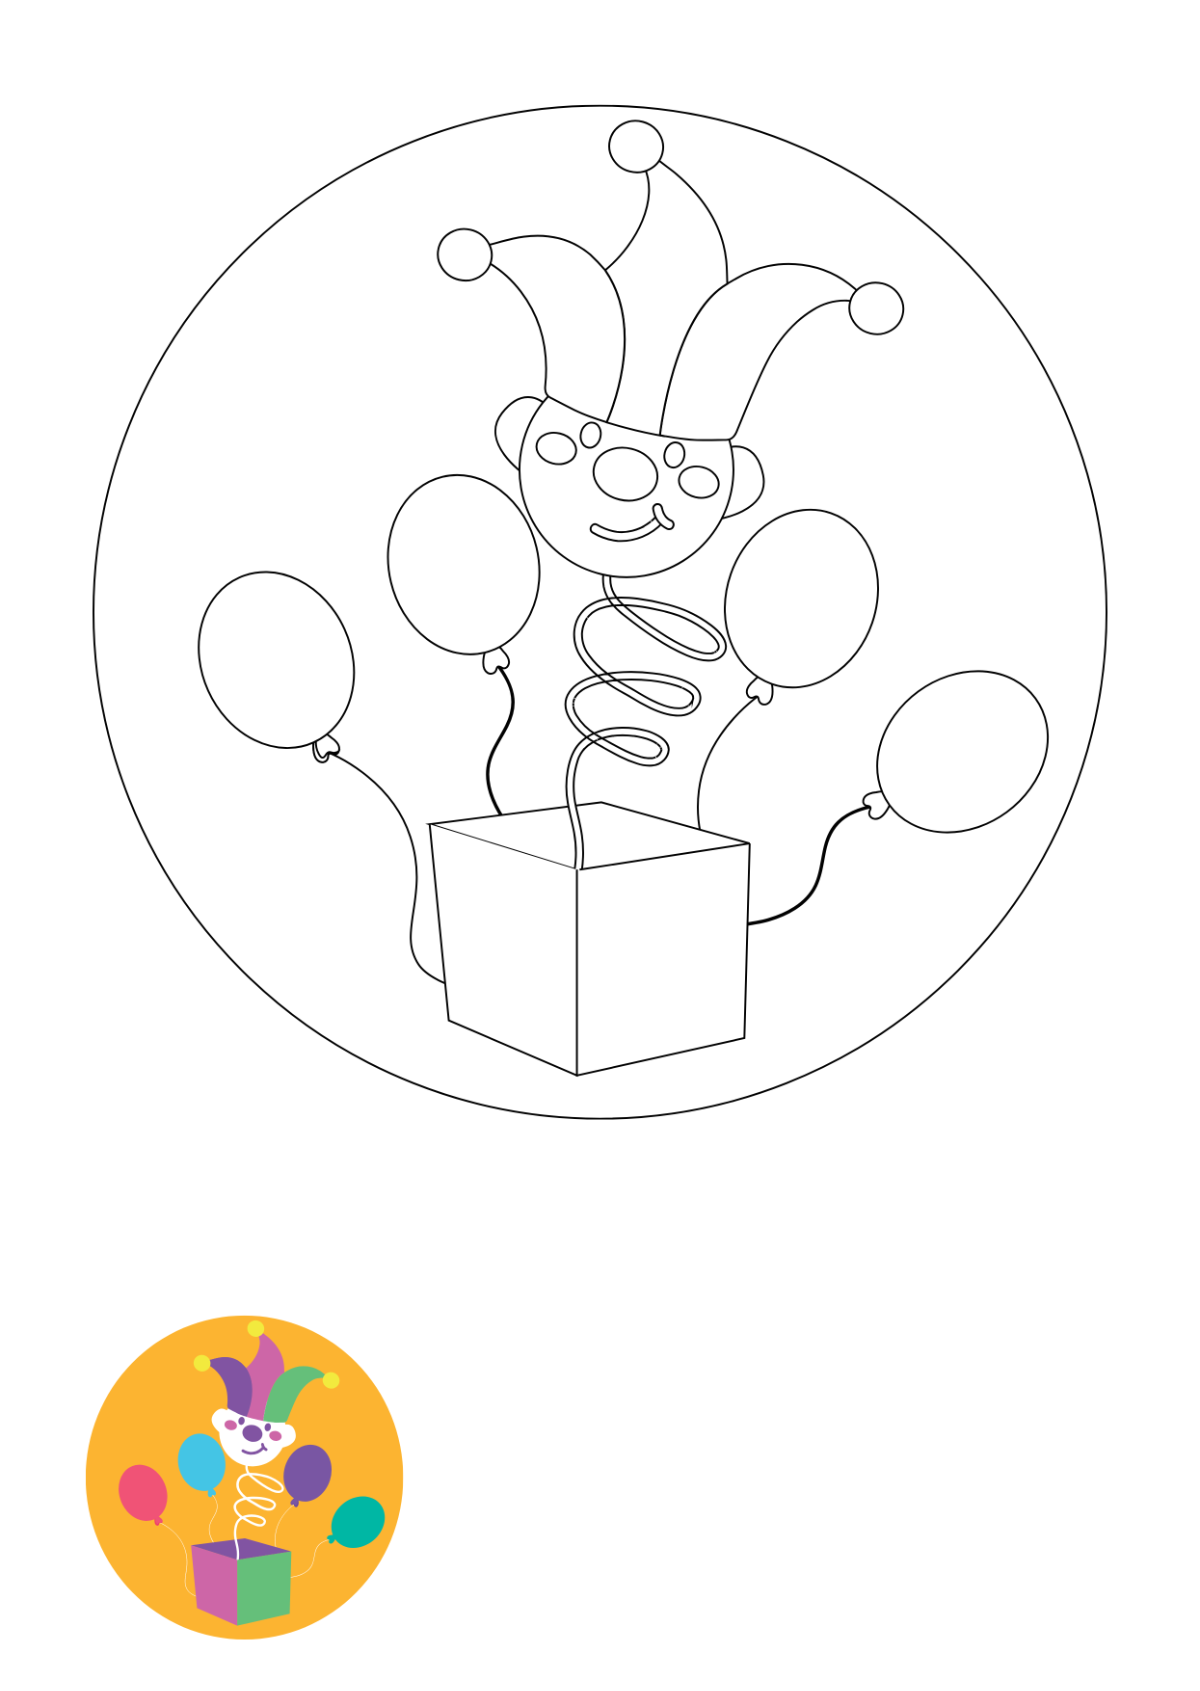 April Fools’ Day Coloring Page Template